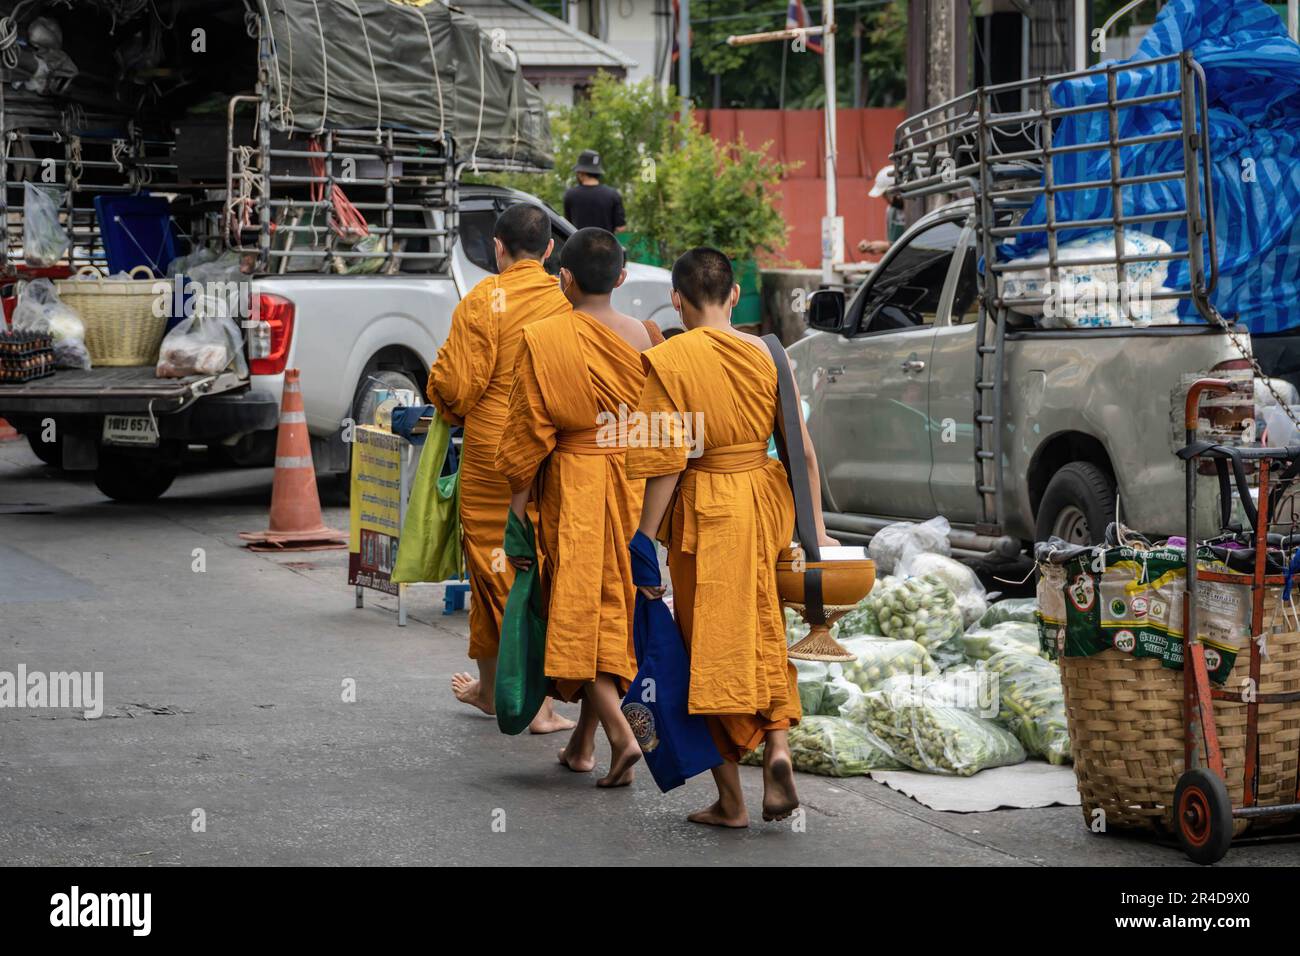 A small group of saffron-robed monks are walking with their alms bowls awaiting alms giving of food donations from the early morning local residents and business owners, all keen to make merit before the start of their day, on the adjacent road of The Bangkok Flower Market (Pak Khlong Talat). Bangkok Flower Market (Pak Khlong Talad) Thailand's largest wholesale flower market, open 24 hours a day, 7 days a week which is adjoining a fresh vegetables, fruits and herbs market, situated on Chak Phet Road, near the Memorial Bridge (Saphan Phut) in the historic old city. (Photo by Nathalie Jamois/S Stock Photo